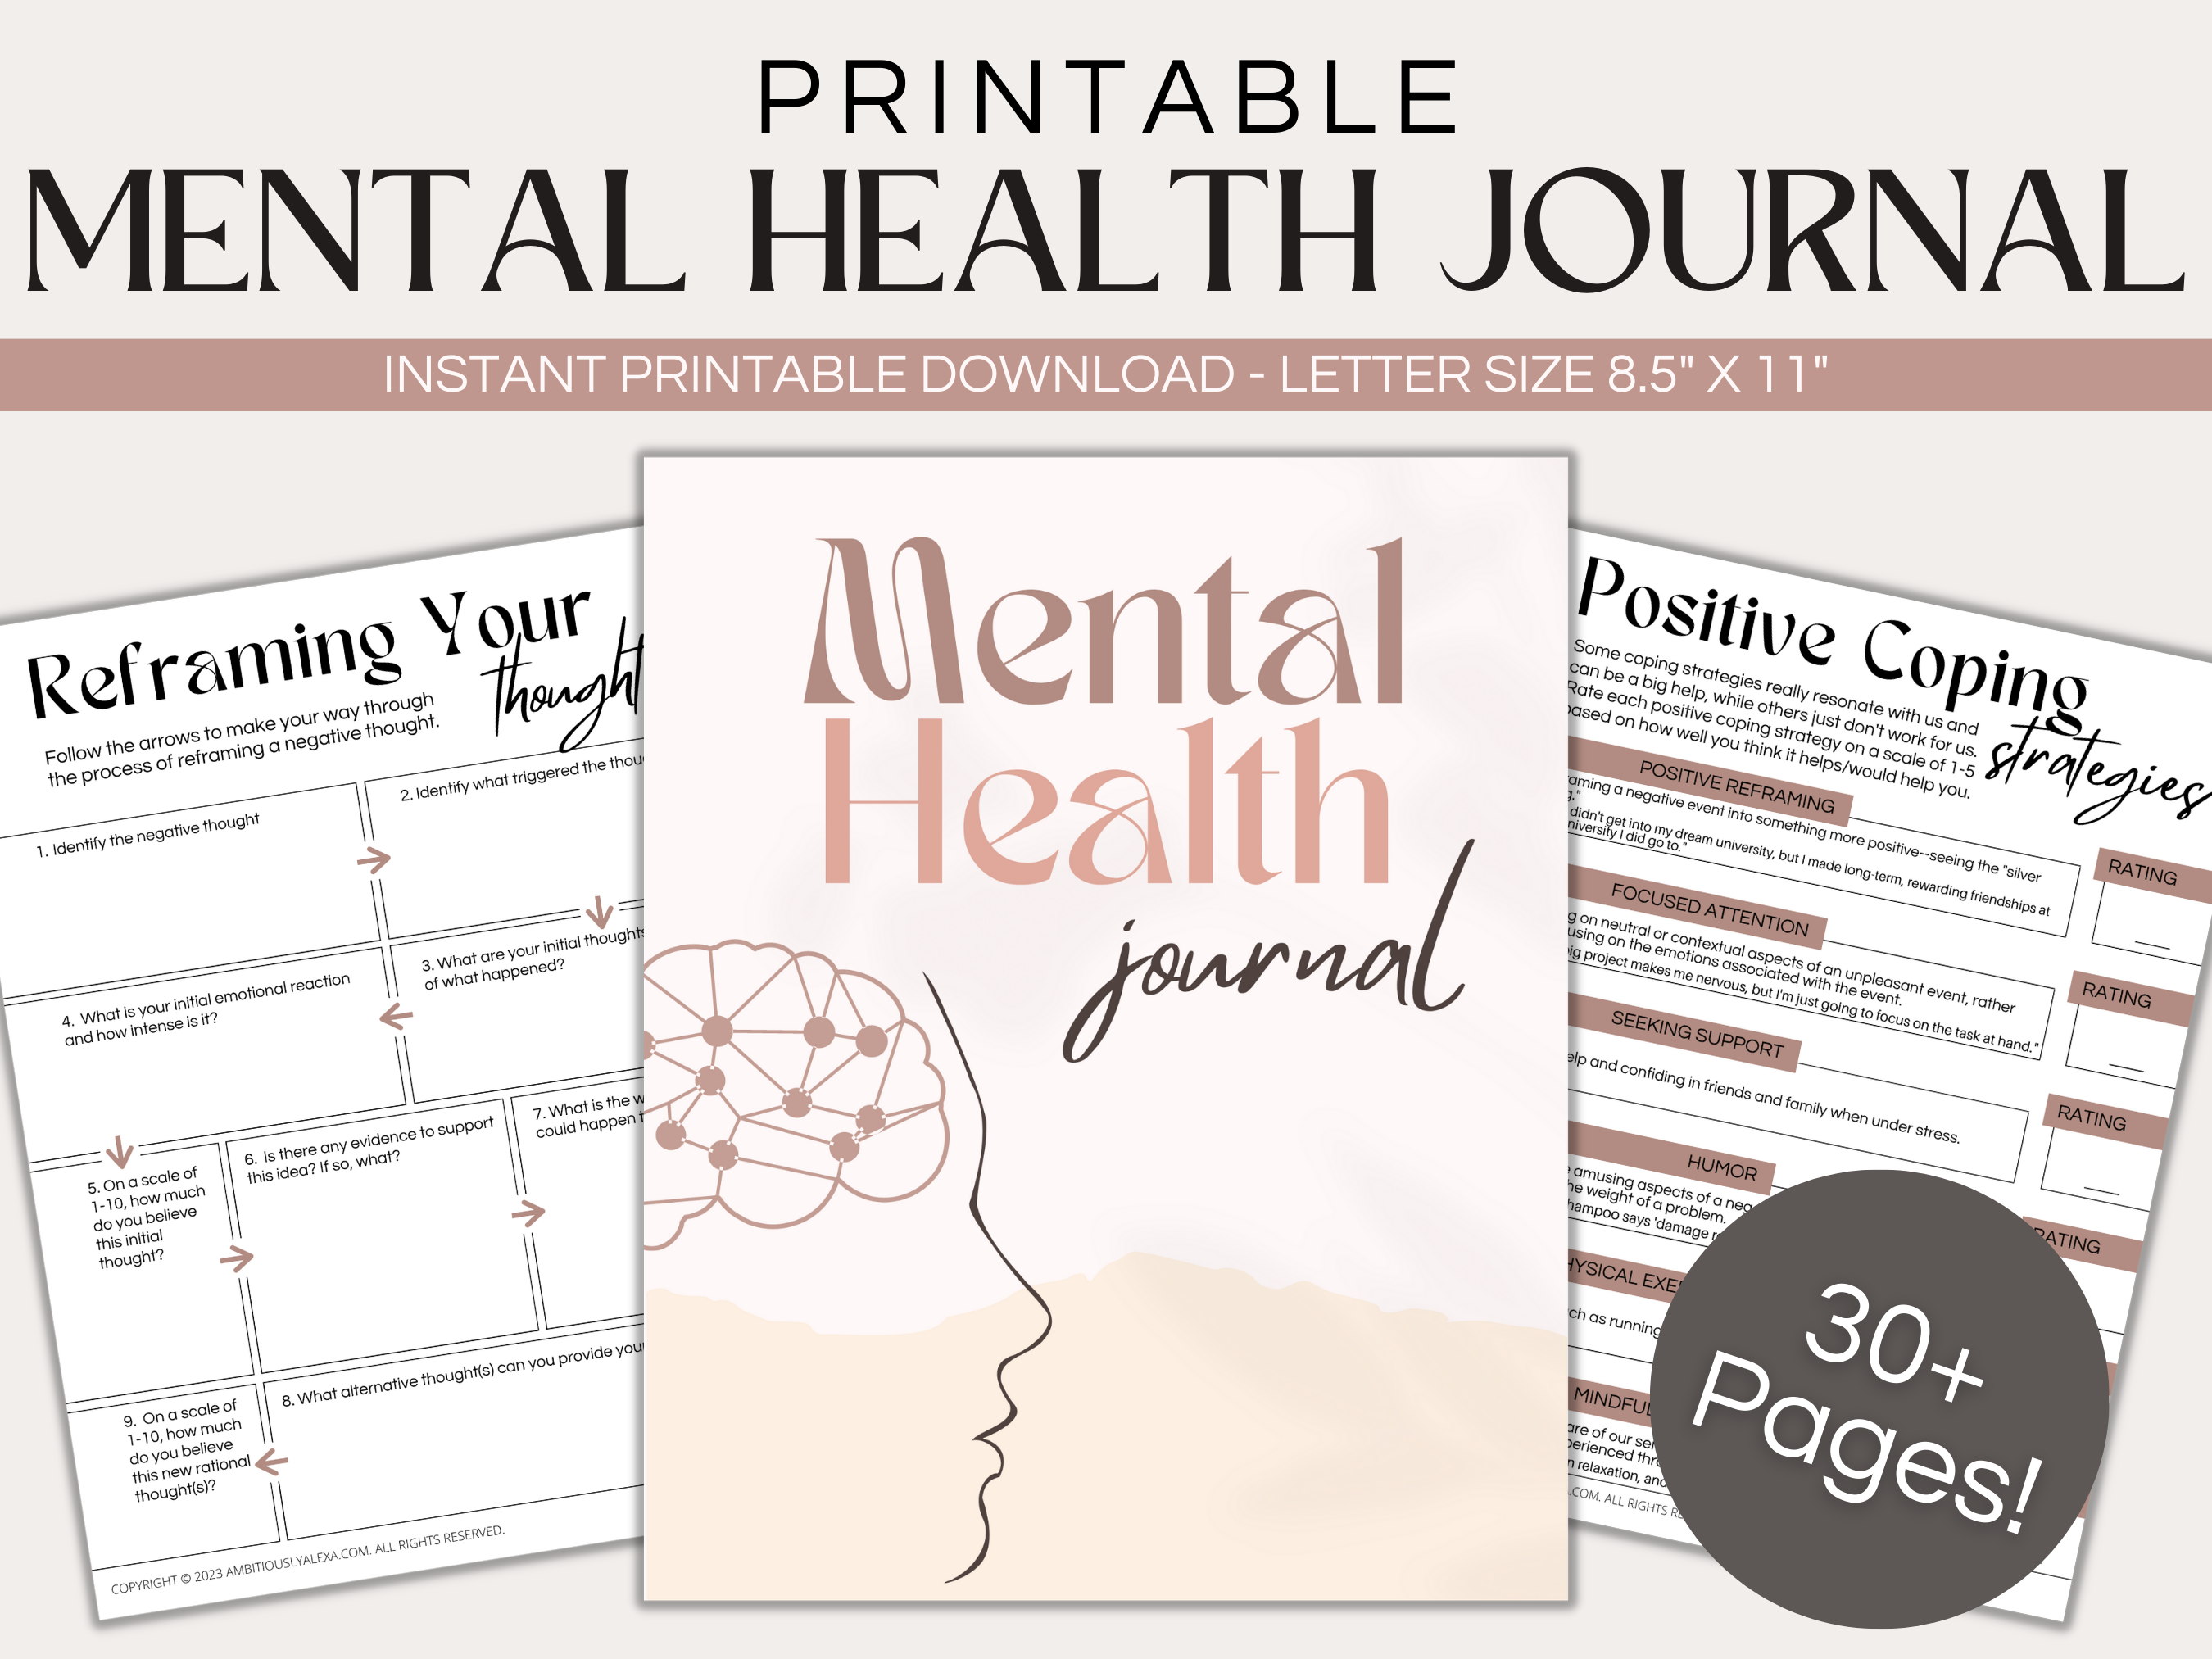 Epic Mental Health: Lord of the Rings Journal by GeekyCounseling —  Kickstarter